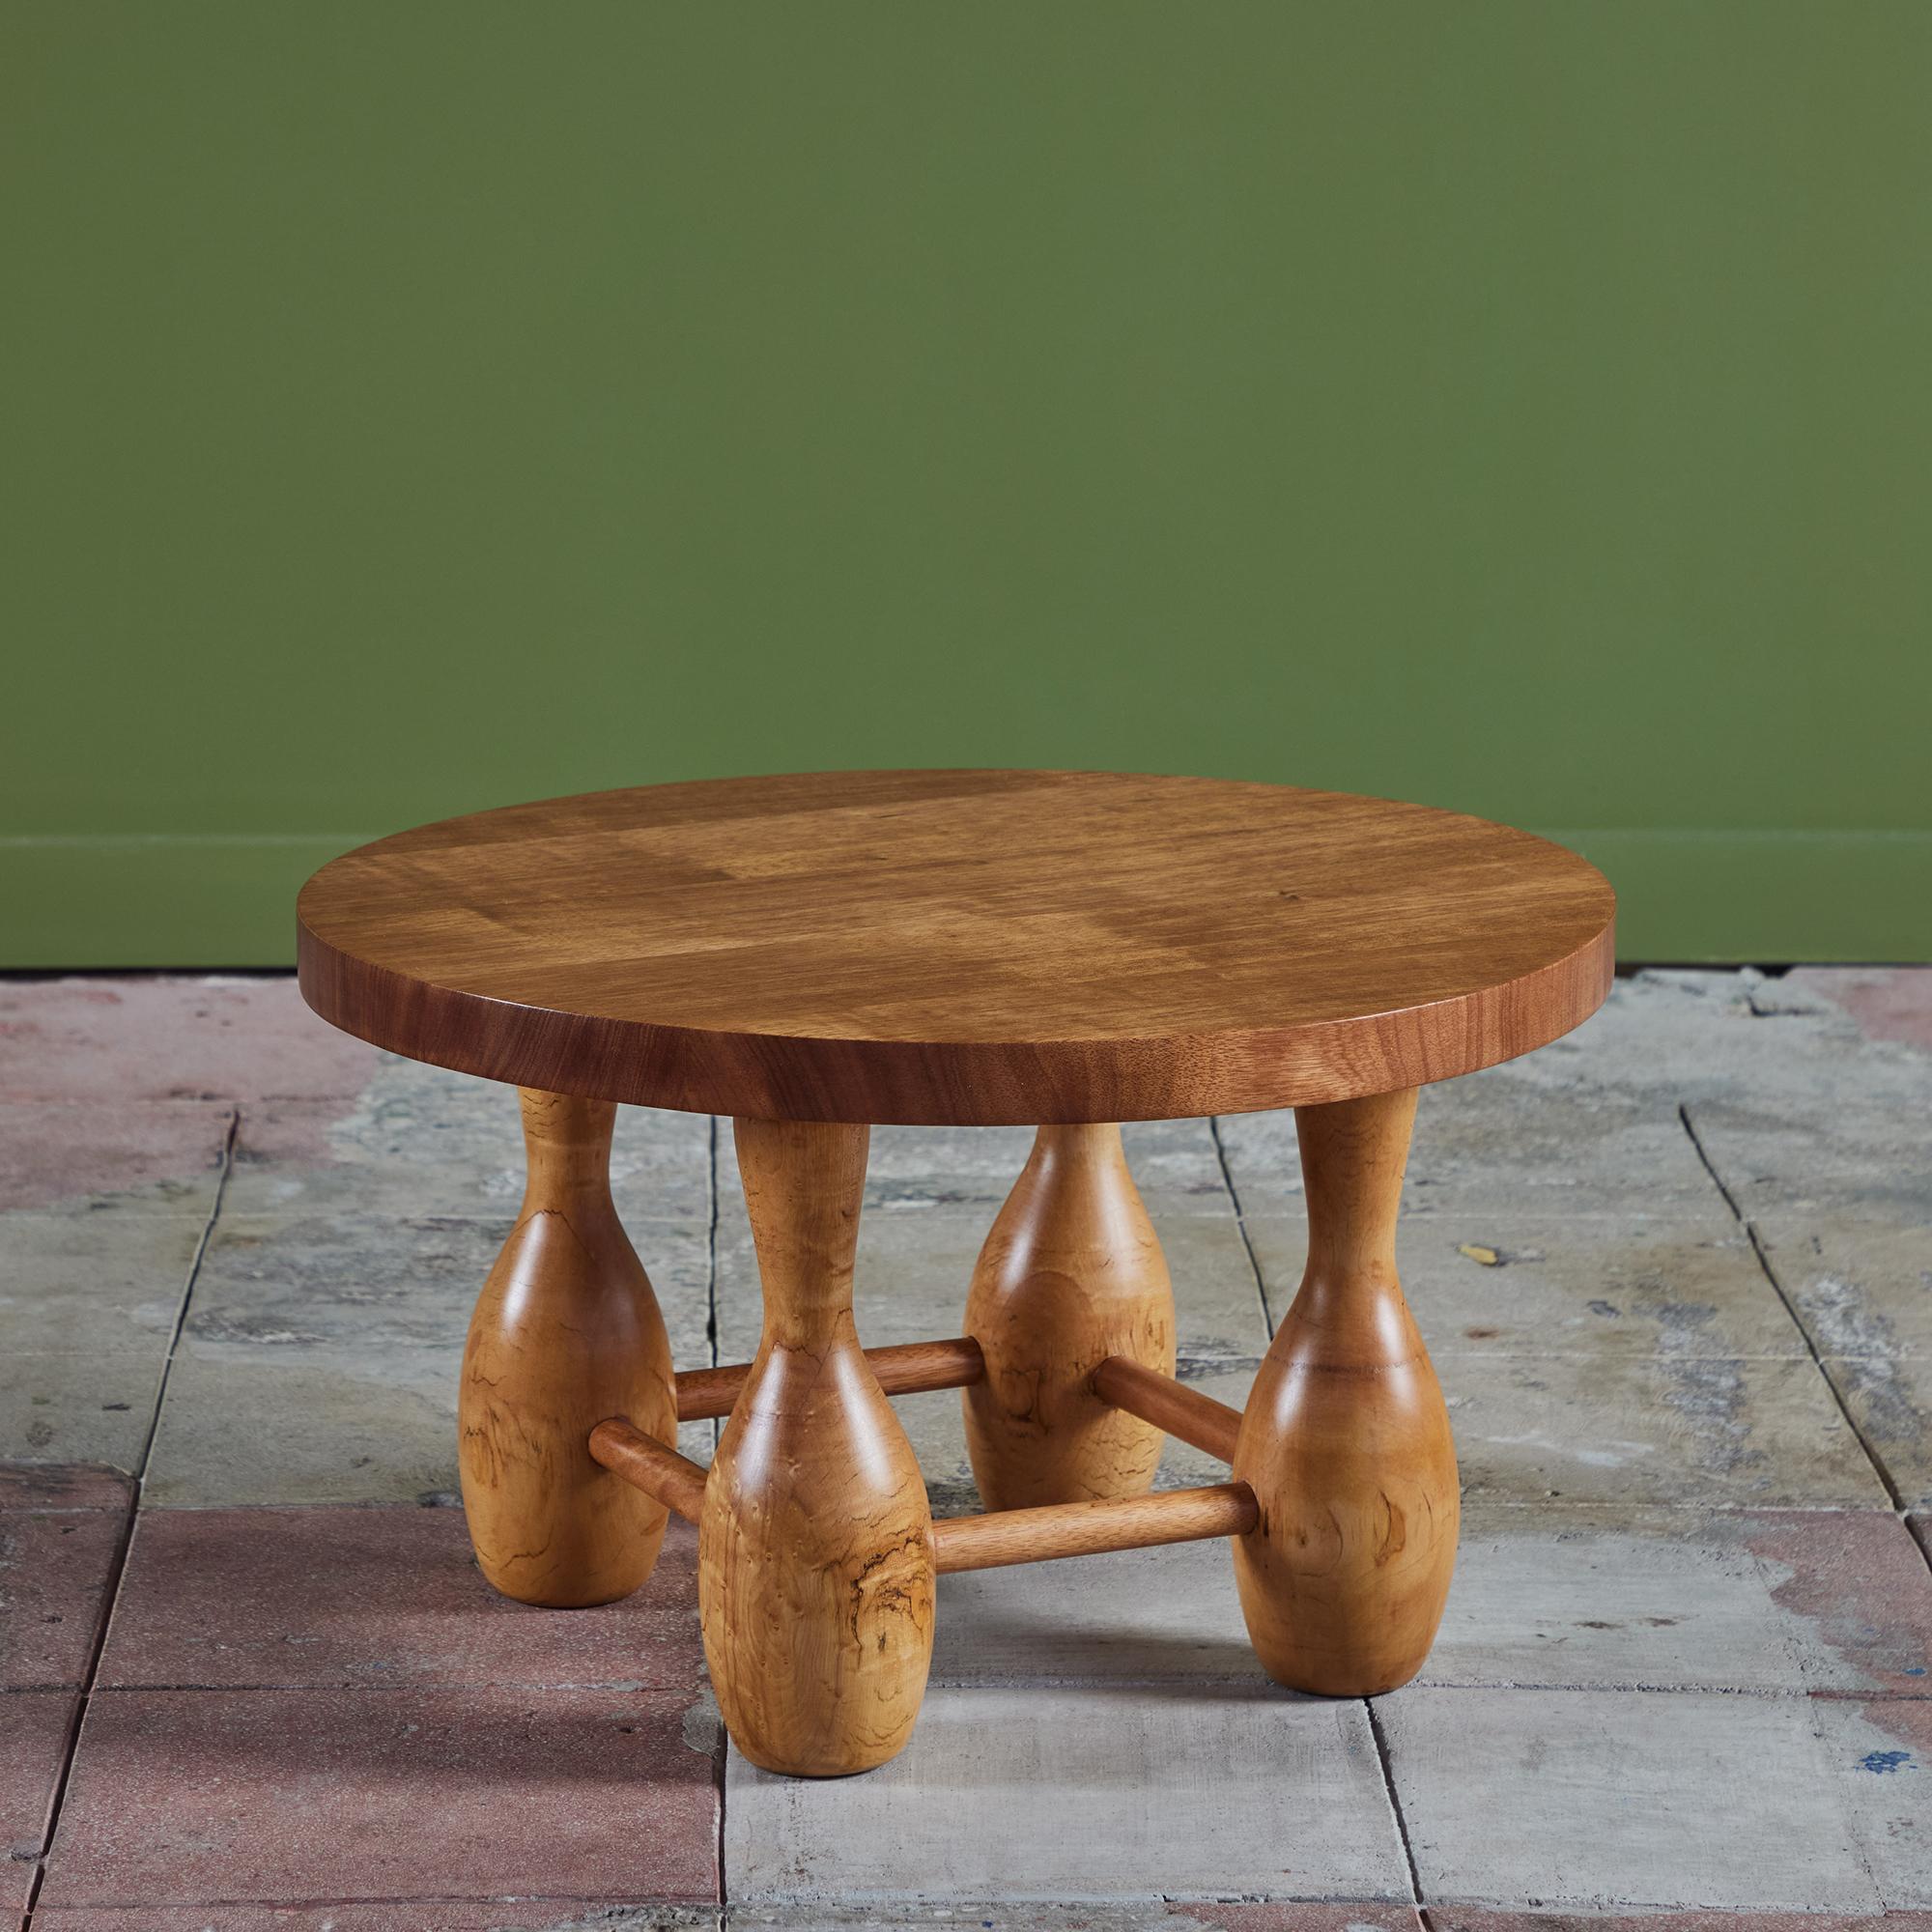 Solid mahogany slab top side table with playful curvy oak legs. This piece features a thick round table top supported by four hand turned legs connected by four stretchers.

Dimensions
25.25